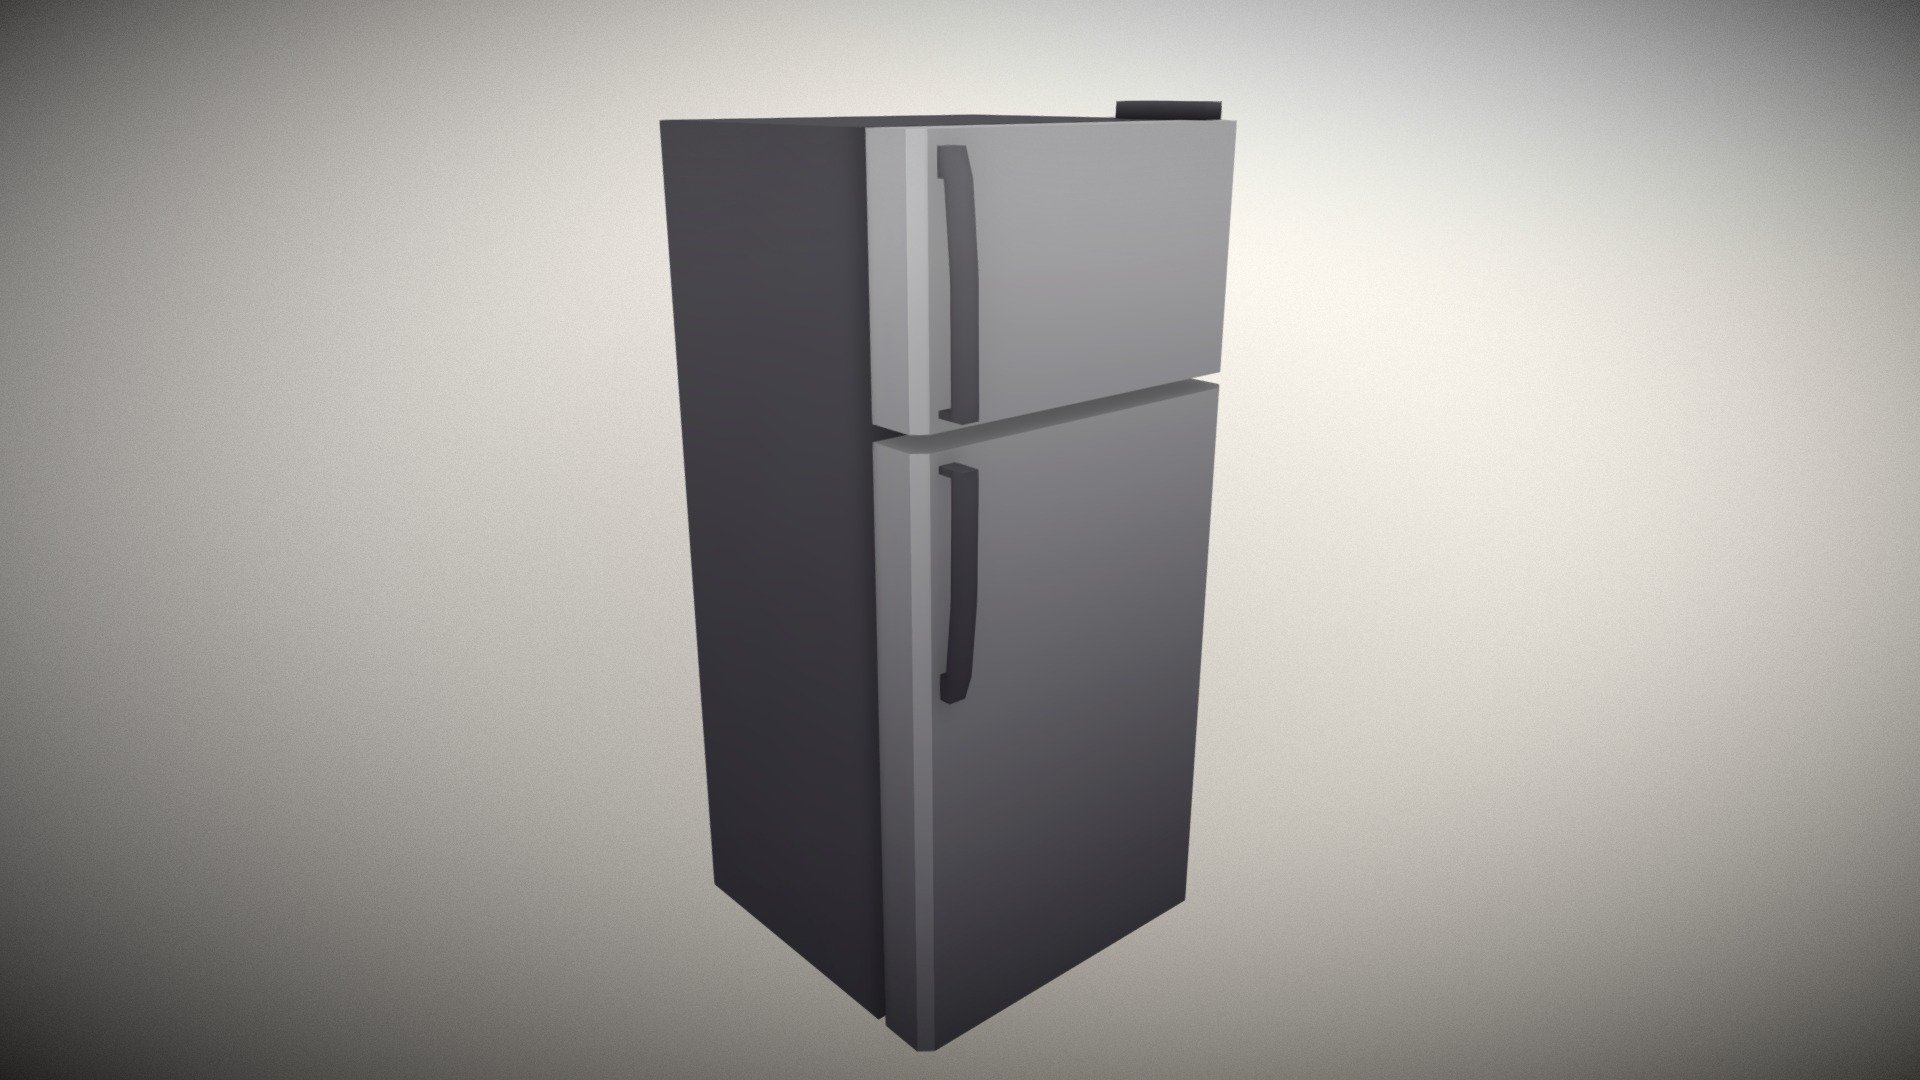 Fridge submission. Decided to go with our defacto apartment fridge. This one went by super quick 3d model